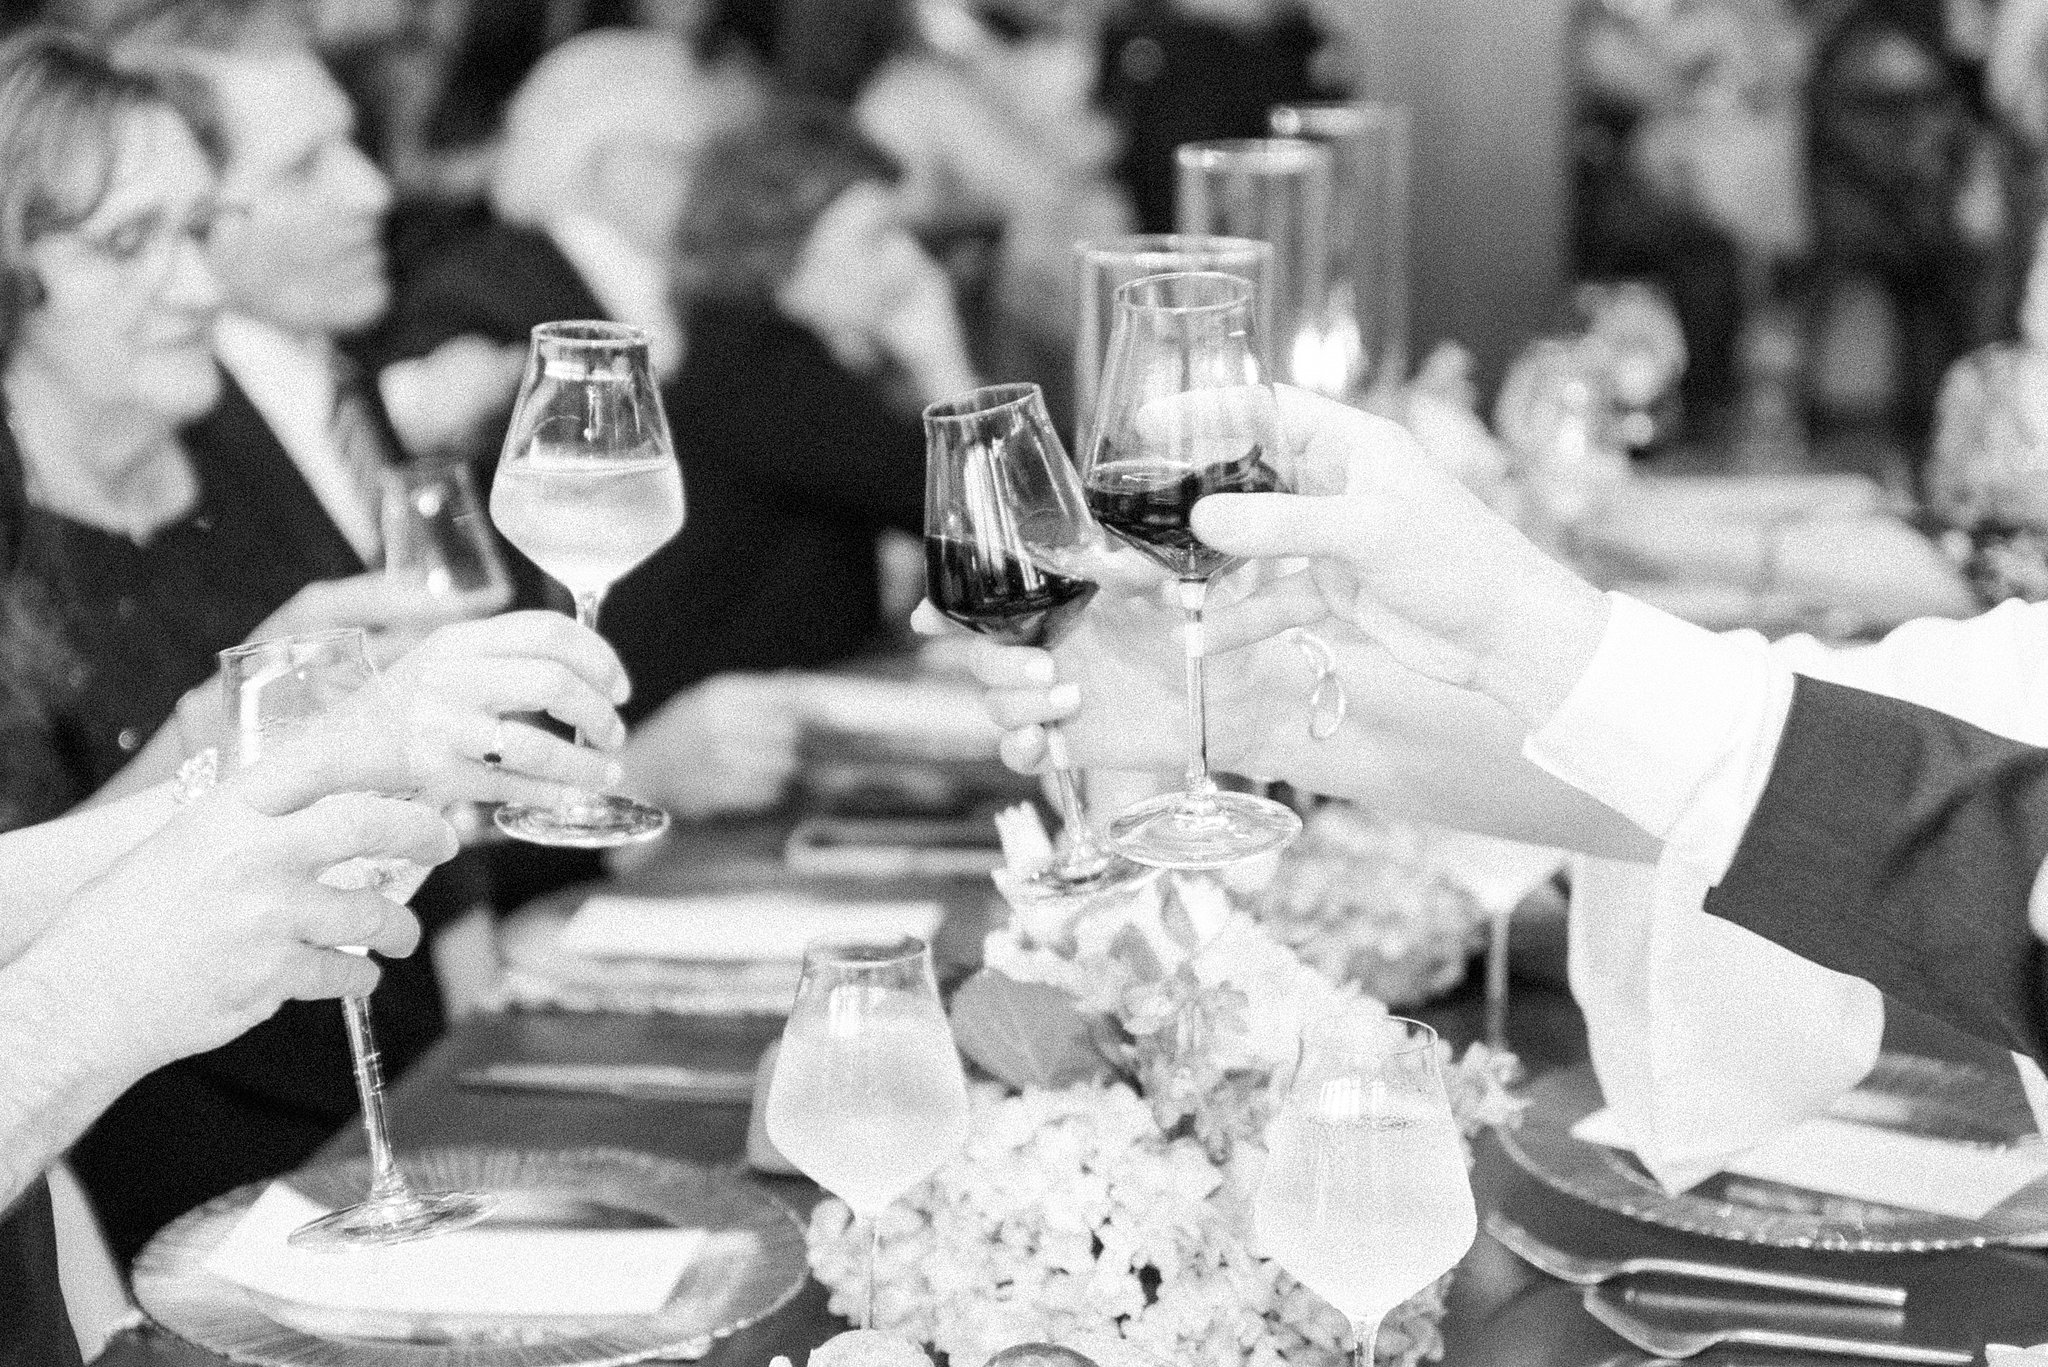 Details of wedding reception guests toasting their wine